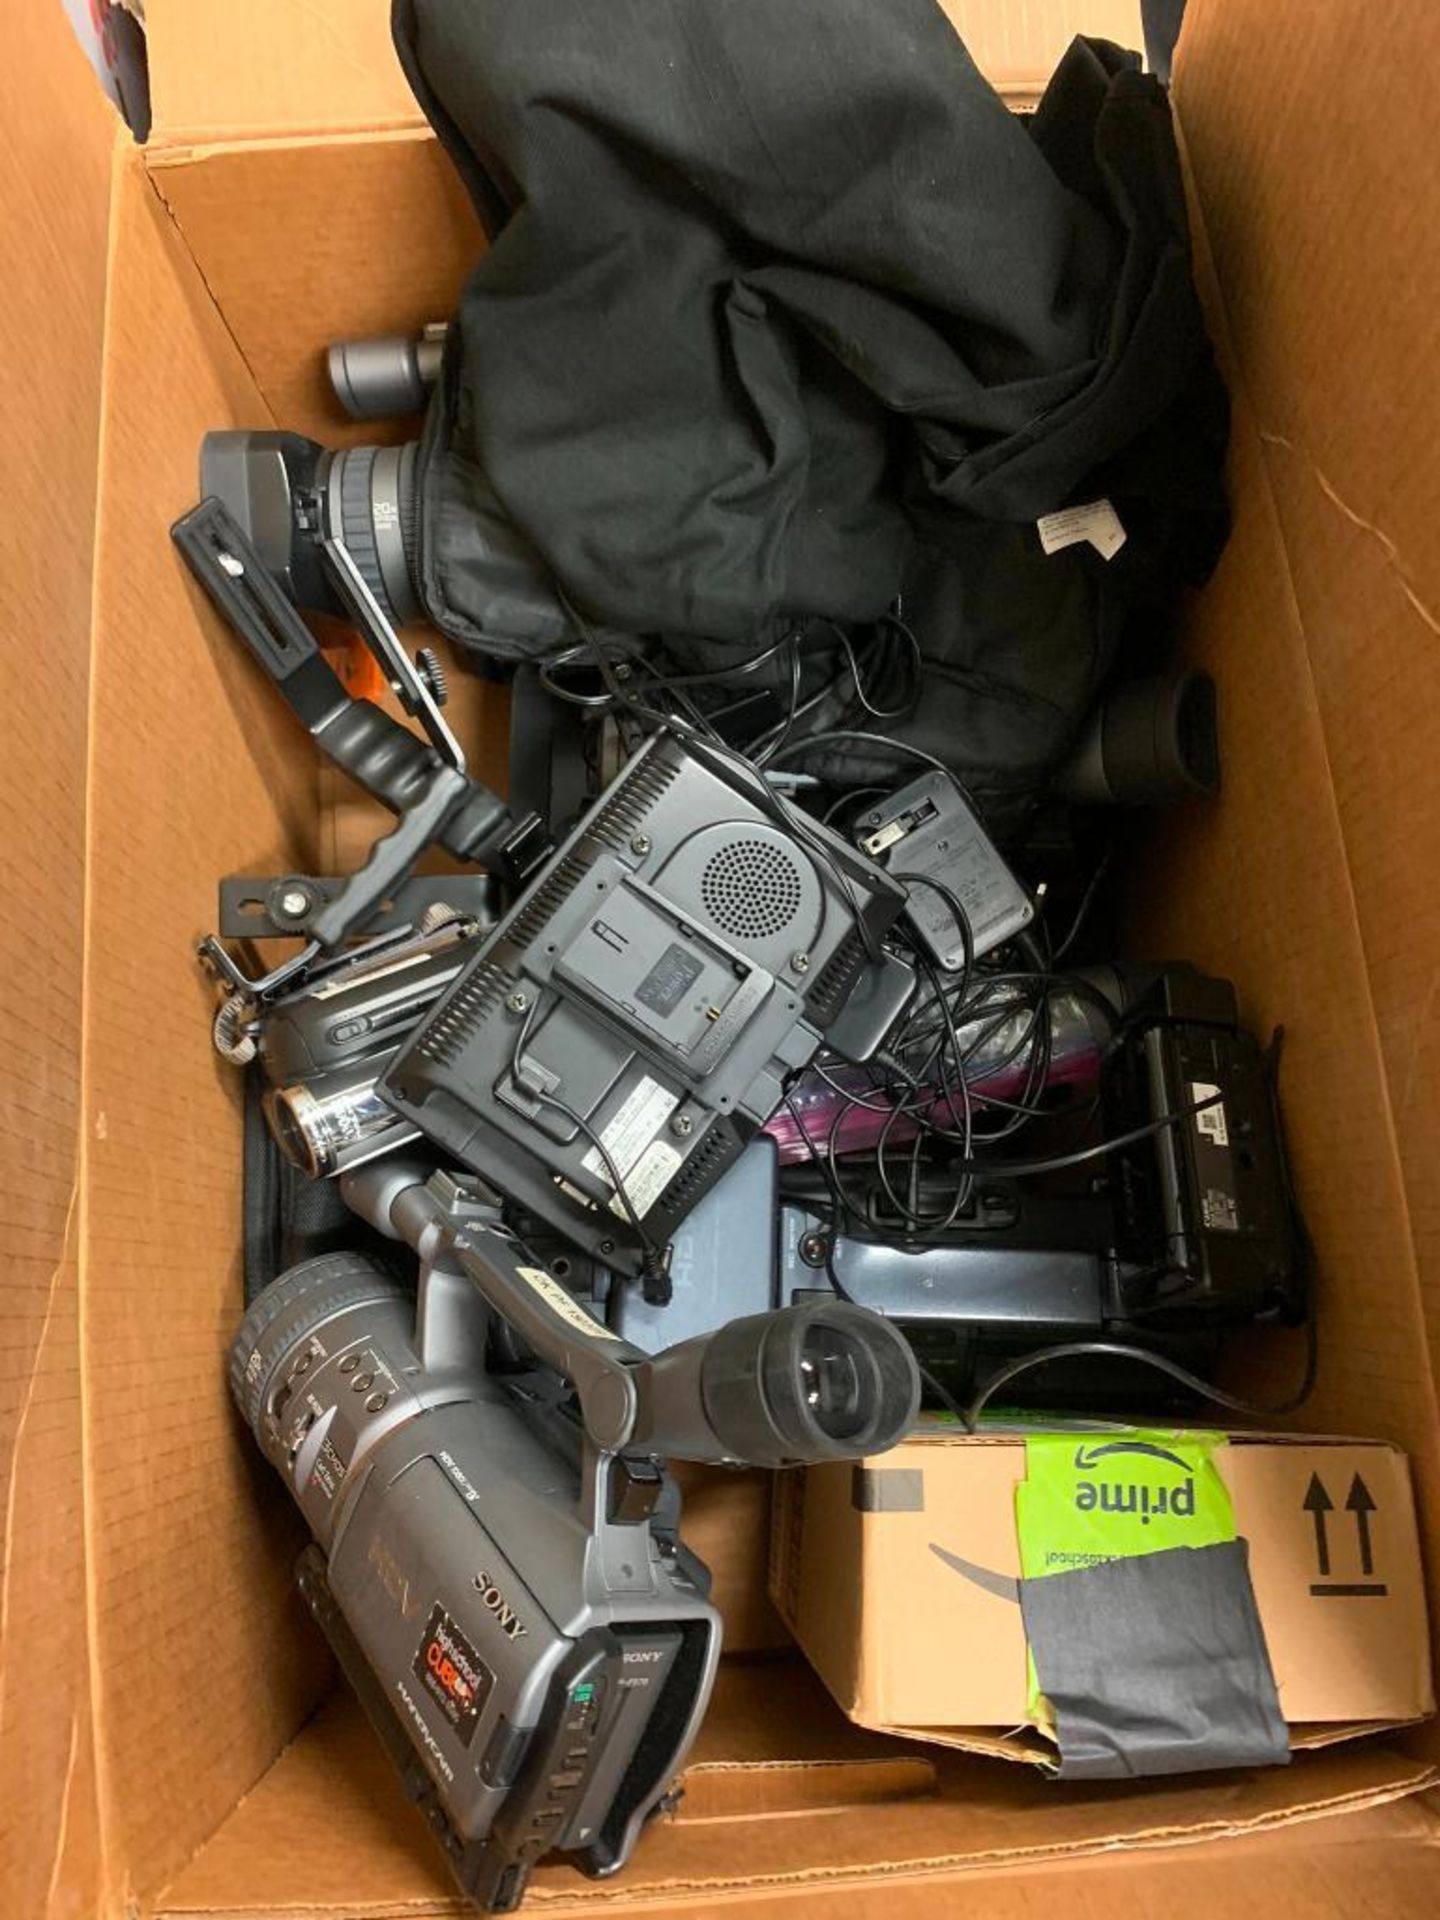 Large Lot of (10) AV Media Bags w/ Digital Camera Recorders, AV Cables, (30+) Tri-Pods, Cable Reels, - Image 4 of 25